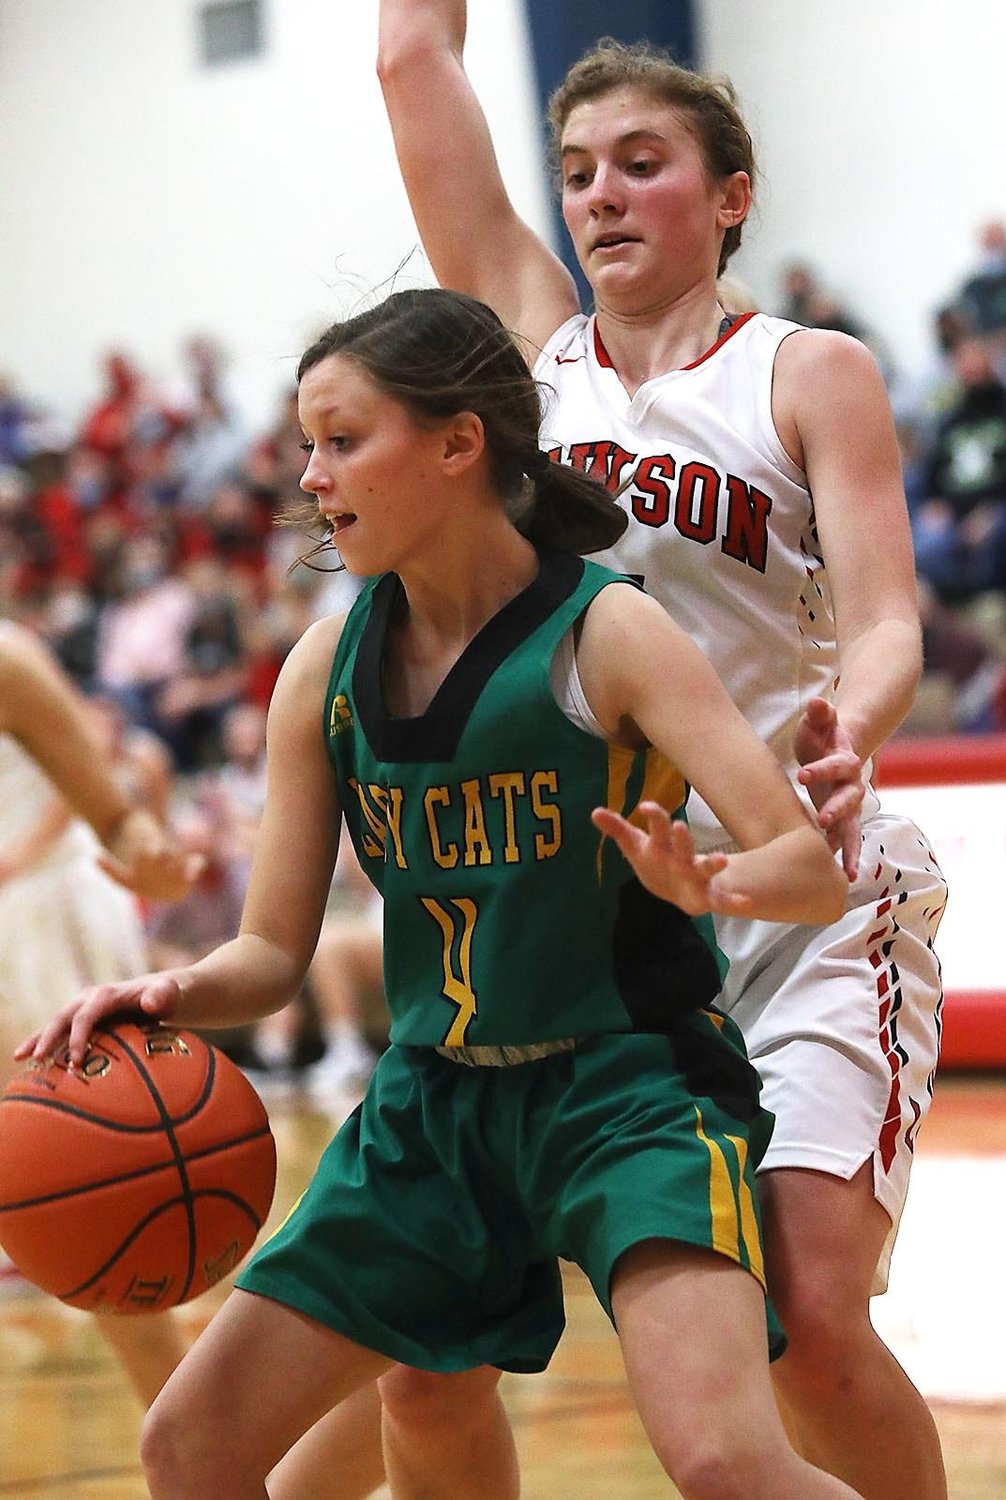 Milan’s Hallie Weaver competes Wednesday evening during Sectional Basketball at Lawson High School.